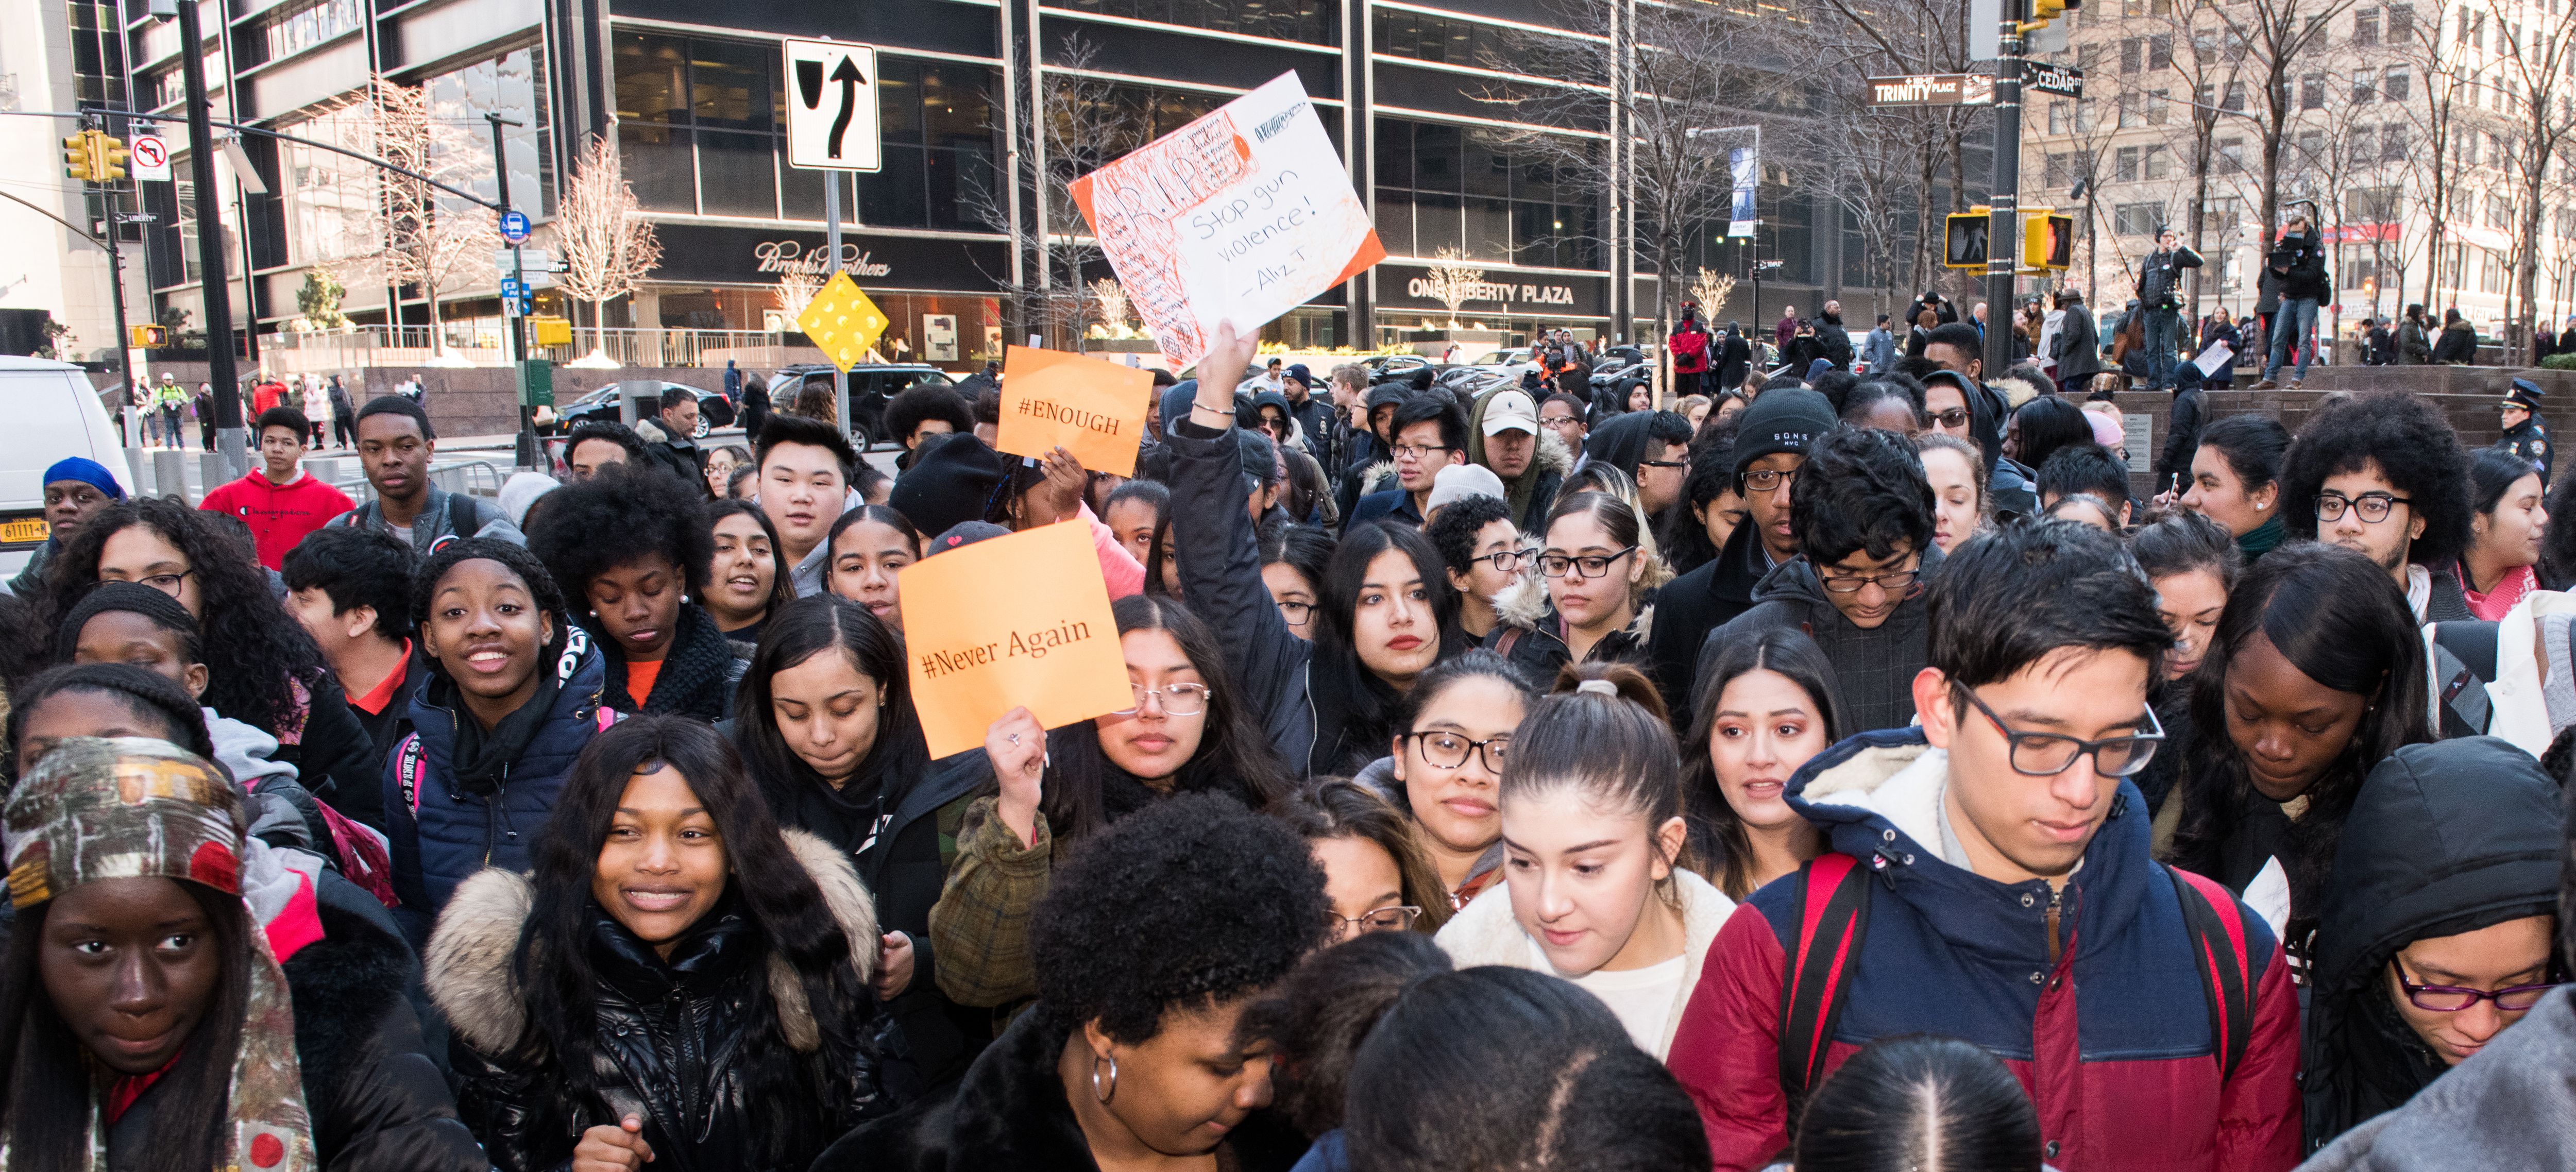 The National School Walkout, a 17 minute walkout by students